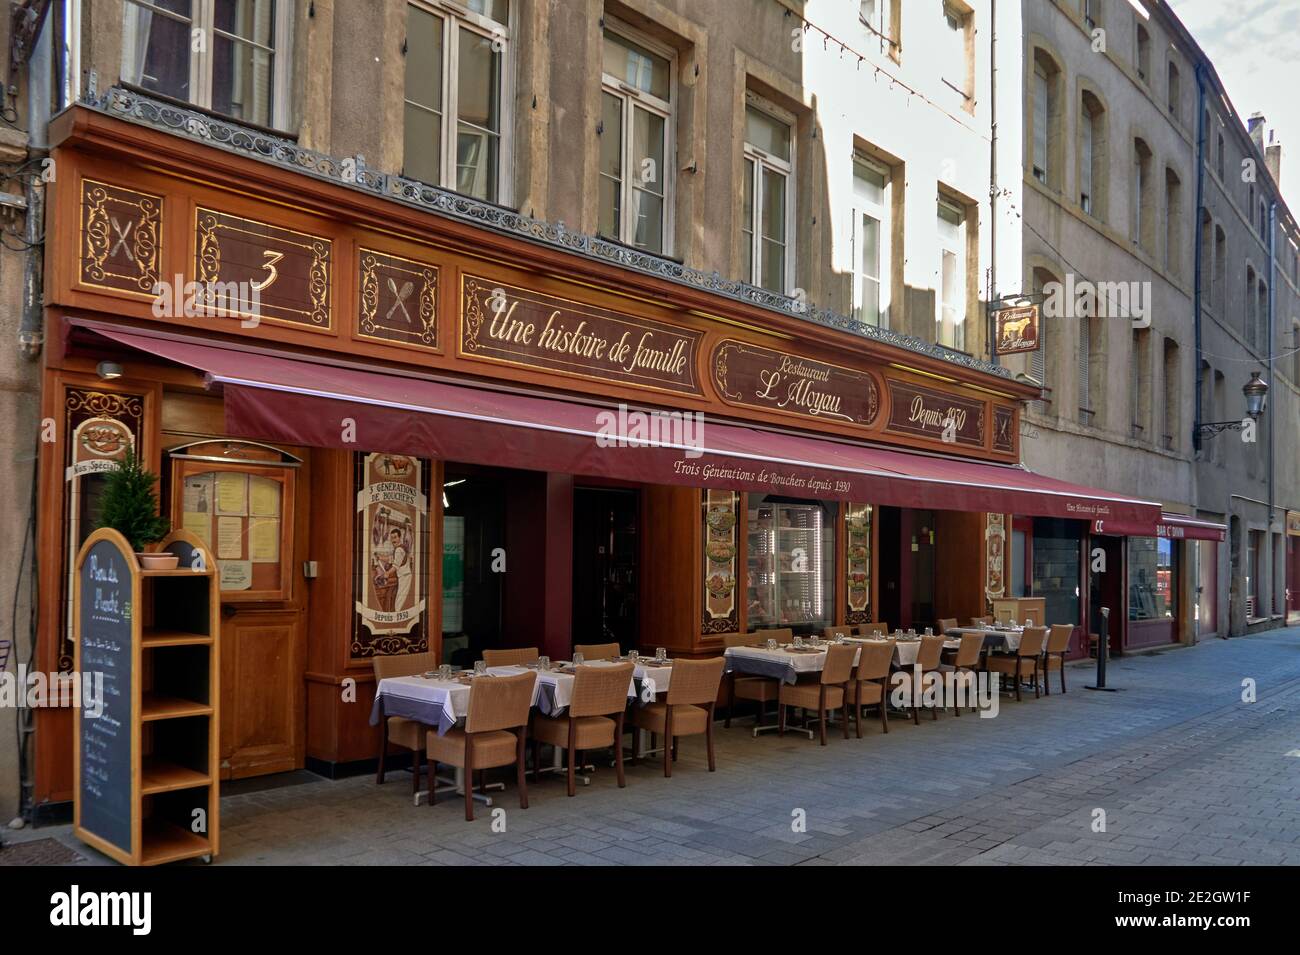 France, Moselle department, Metz city, Lorraine;Grand Est administrative region, An old traditional elegant restaurant with its woodwork façade in the Stock Photo